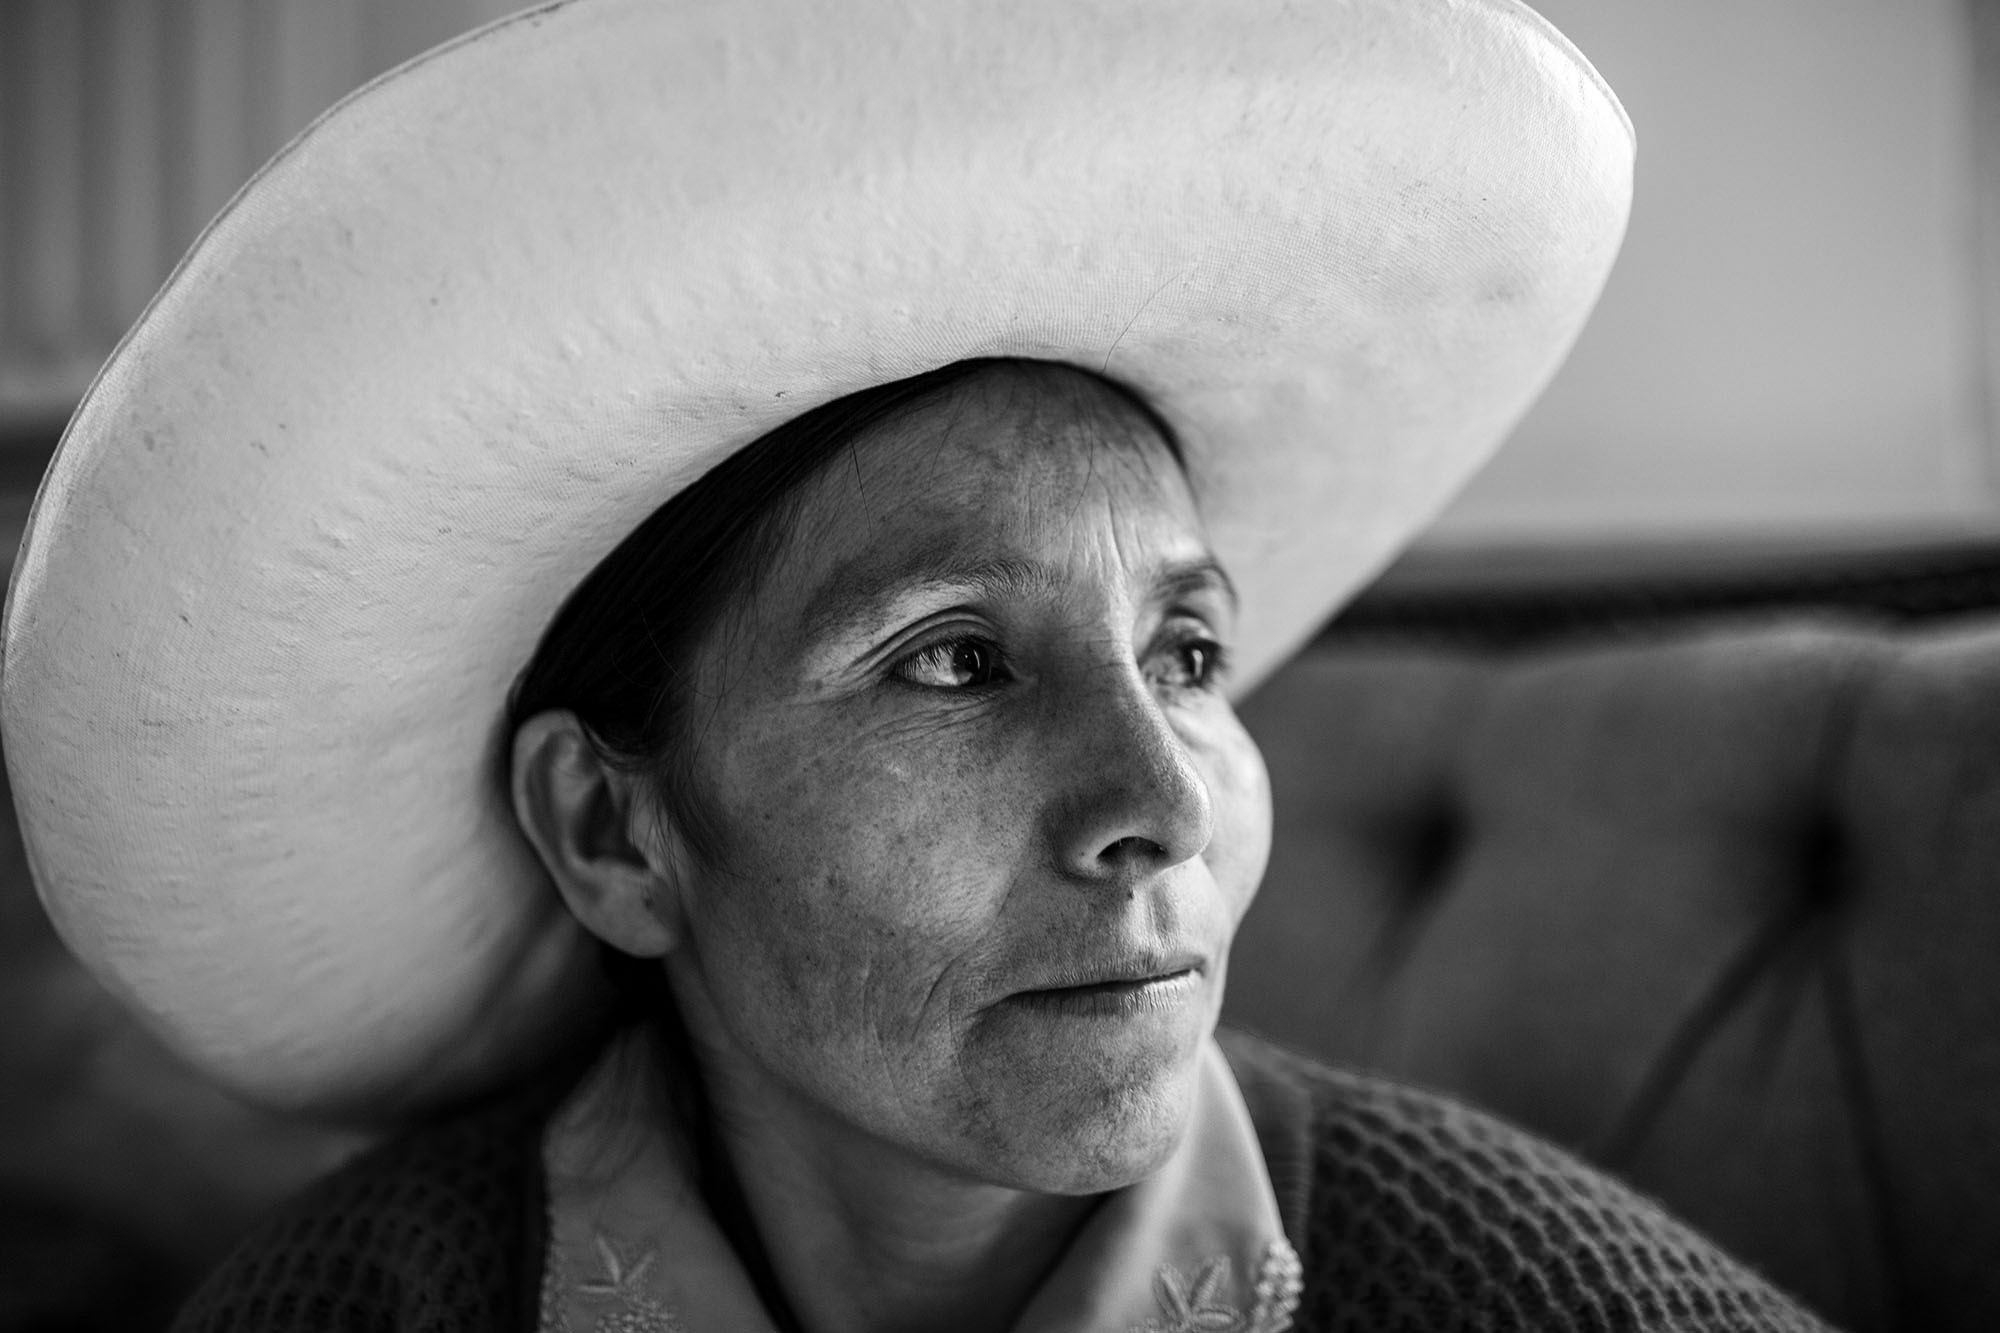   Máxima Acuña de Chaupe, winner of the Goldman Environmental Prize, became a symbol of resistance refusing to sell her 60-acre of land in Perú to the largest gold-mining project in South America.  